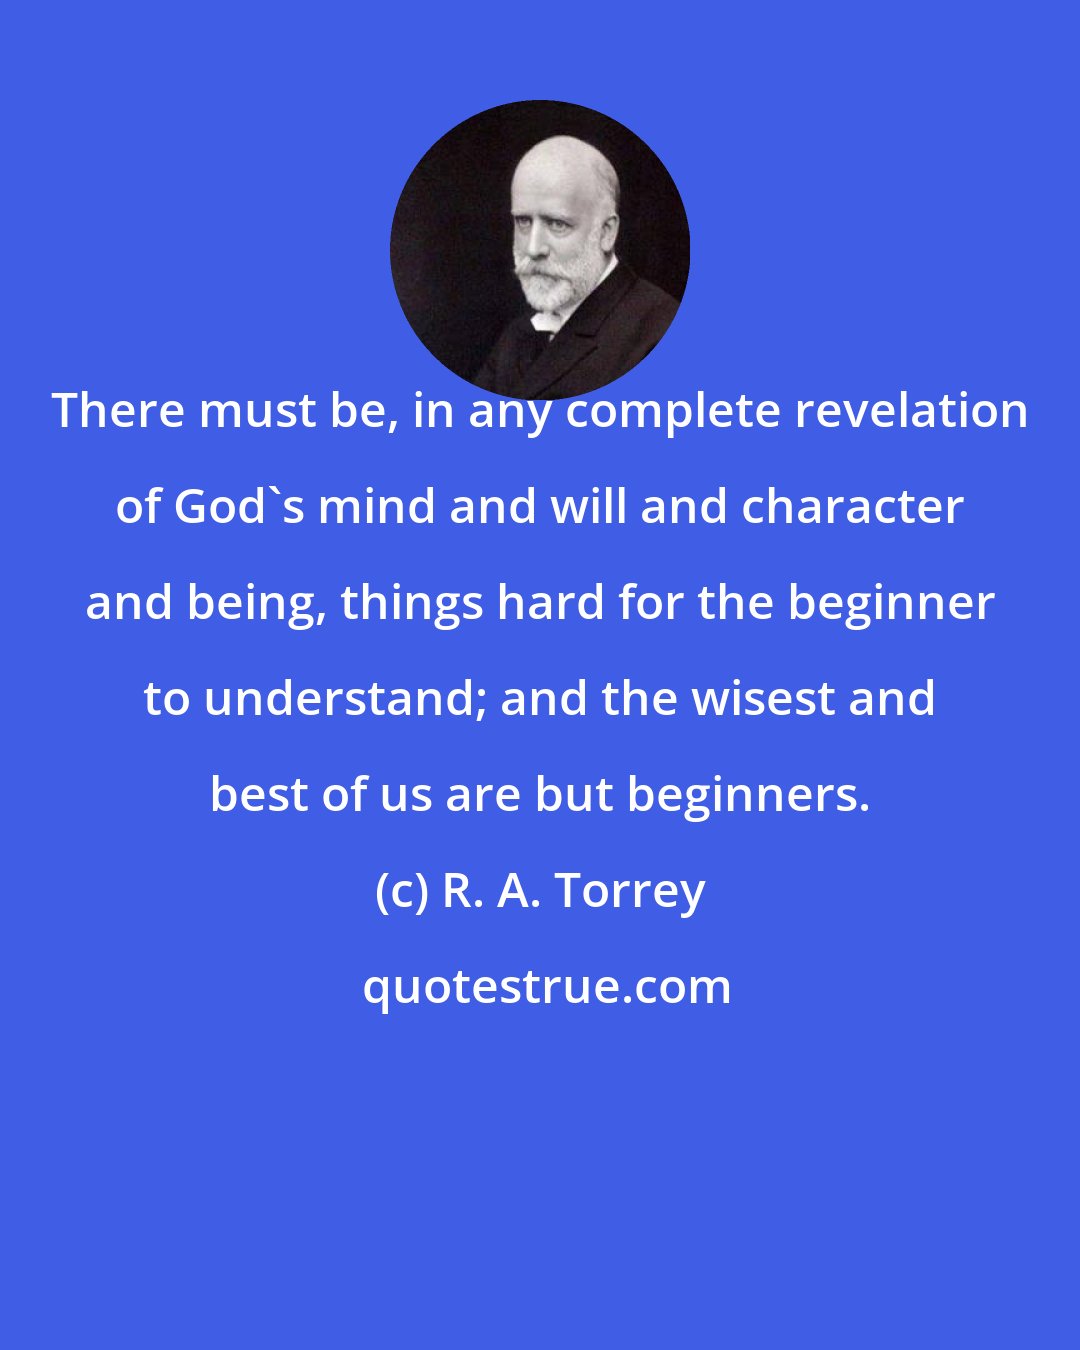 R. A. Torrey: There must be, in any complete revelation of God's mind and will and character and being, things hard for the beginner to understand; and the wisest and best of us are but beginners.